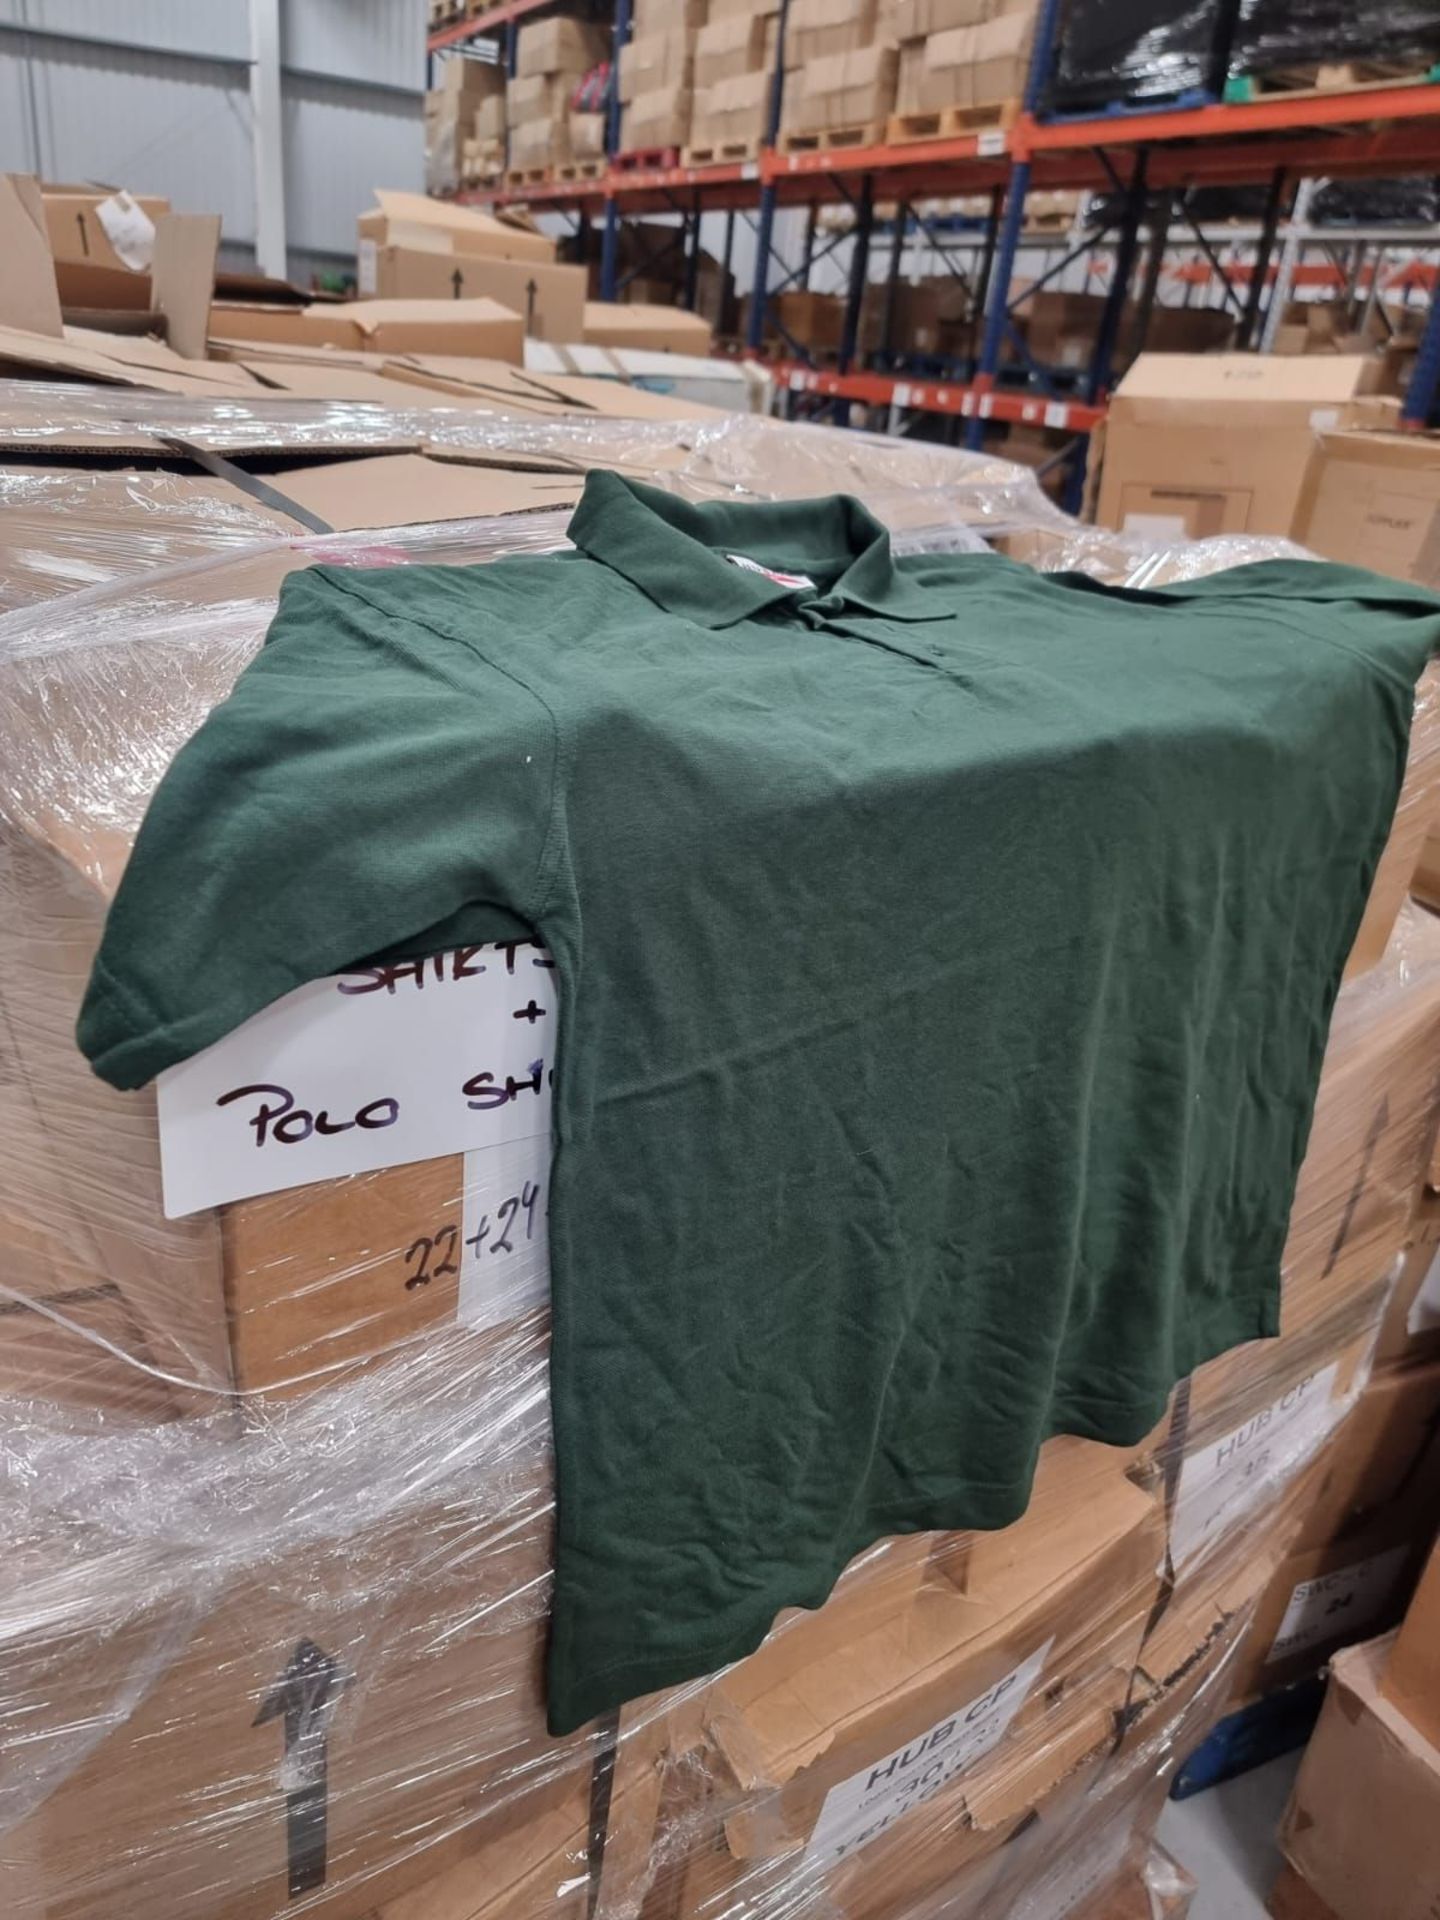 PALLET TO CONTAIN A LARGE QUANTITY OF NEW CLOTHING GOODS. MAY INCLUDE ITEMS SUCH AS: T-SHIRTS, - Image 6 of 28